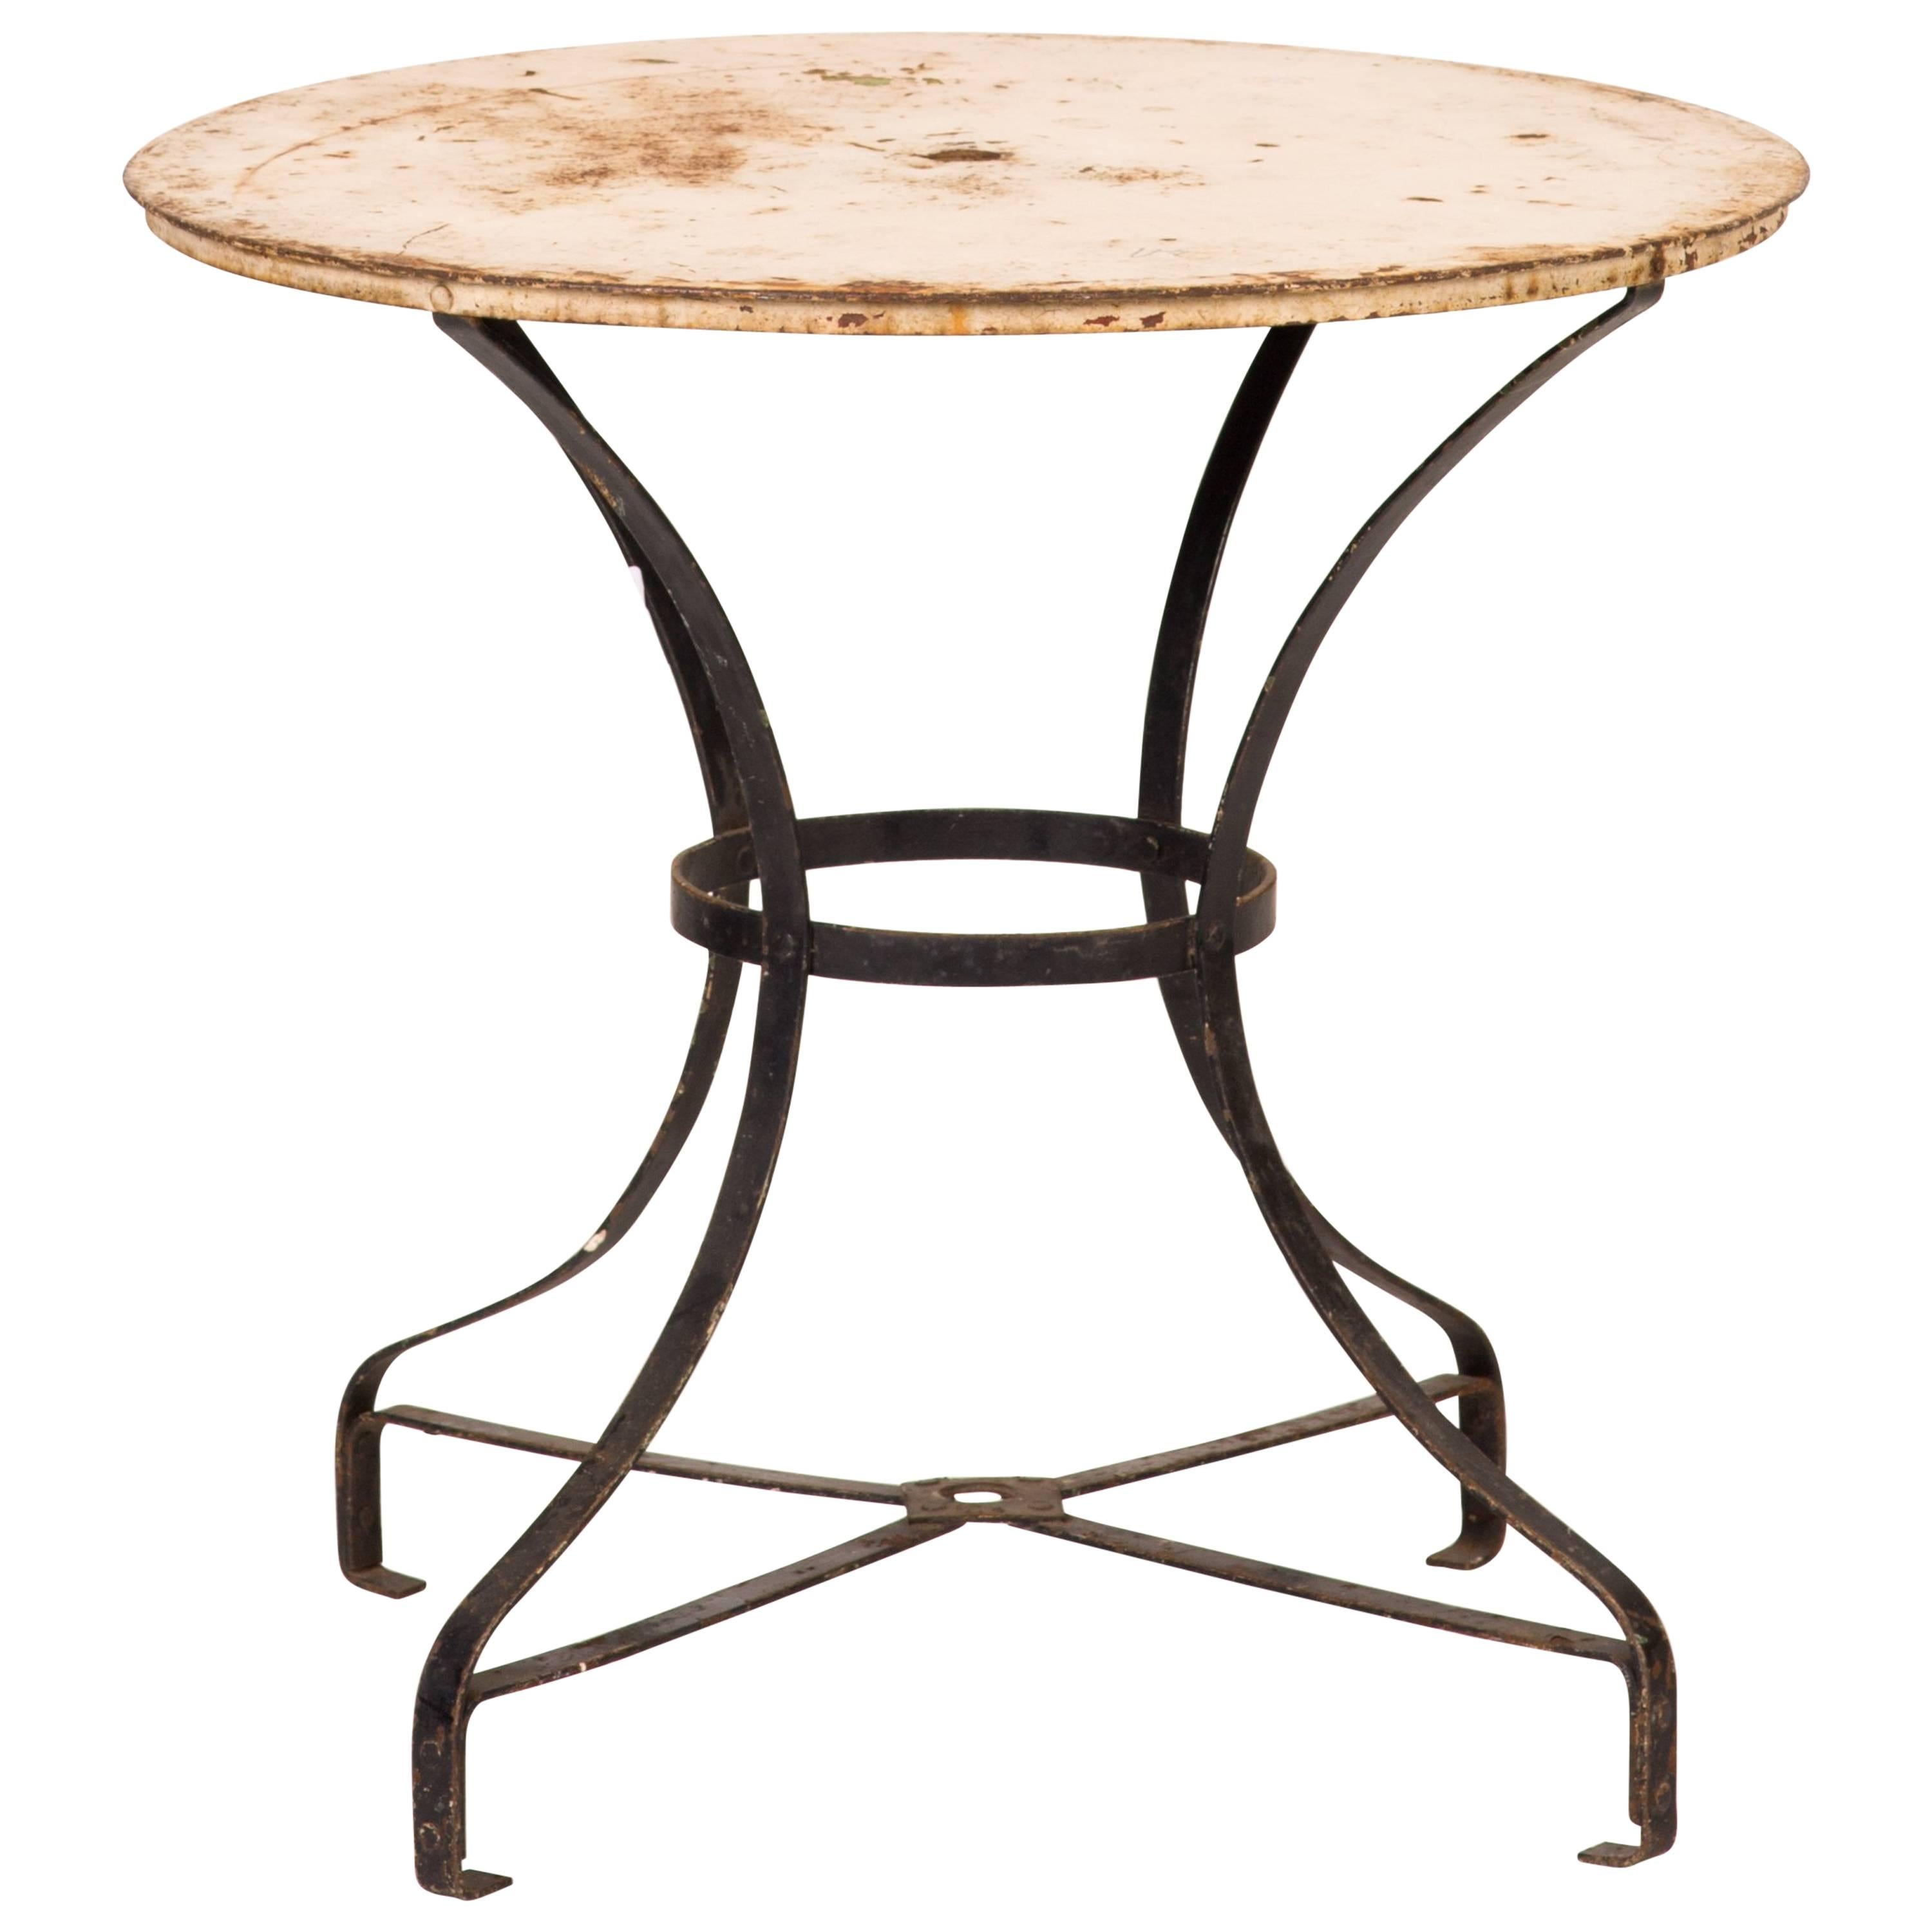 An Early 20th Century Round Top Garden Table with Metal Base